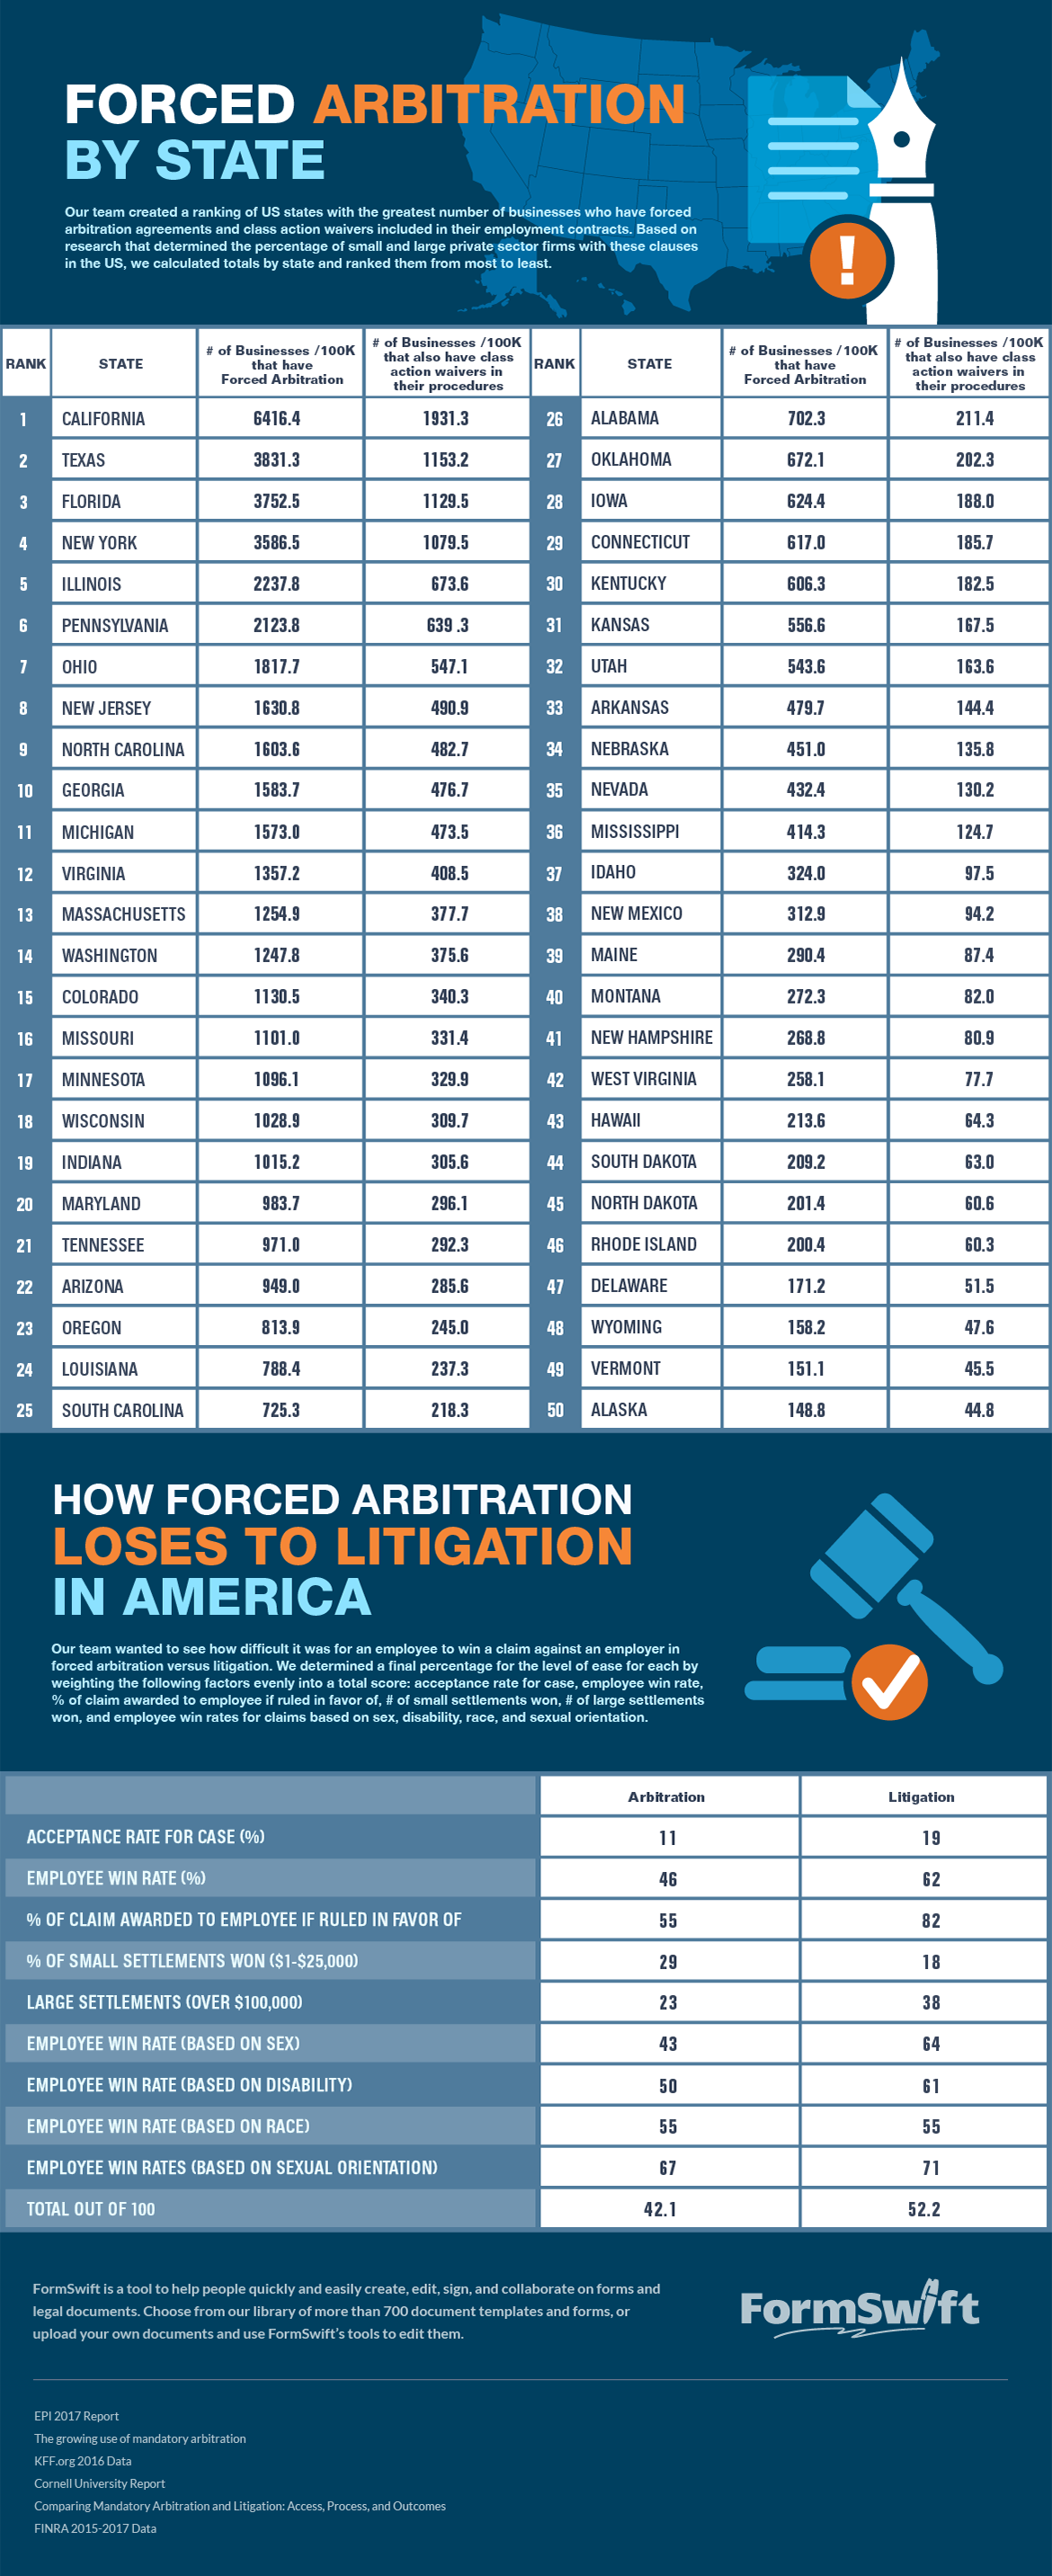 Study on forced arbitration and litigation in US States in 2018.